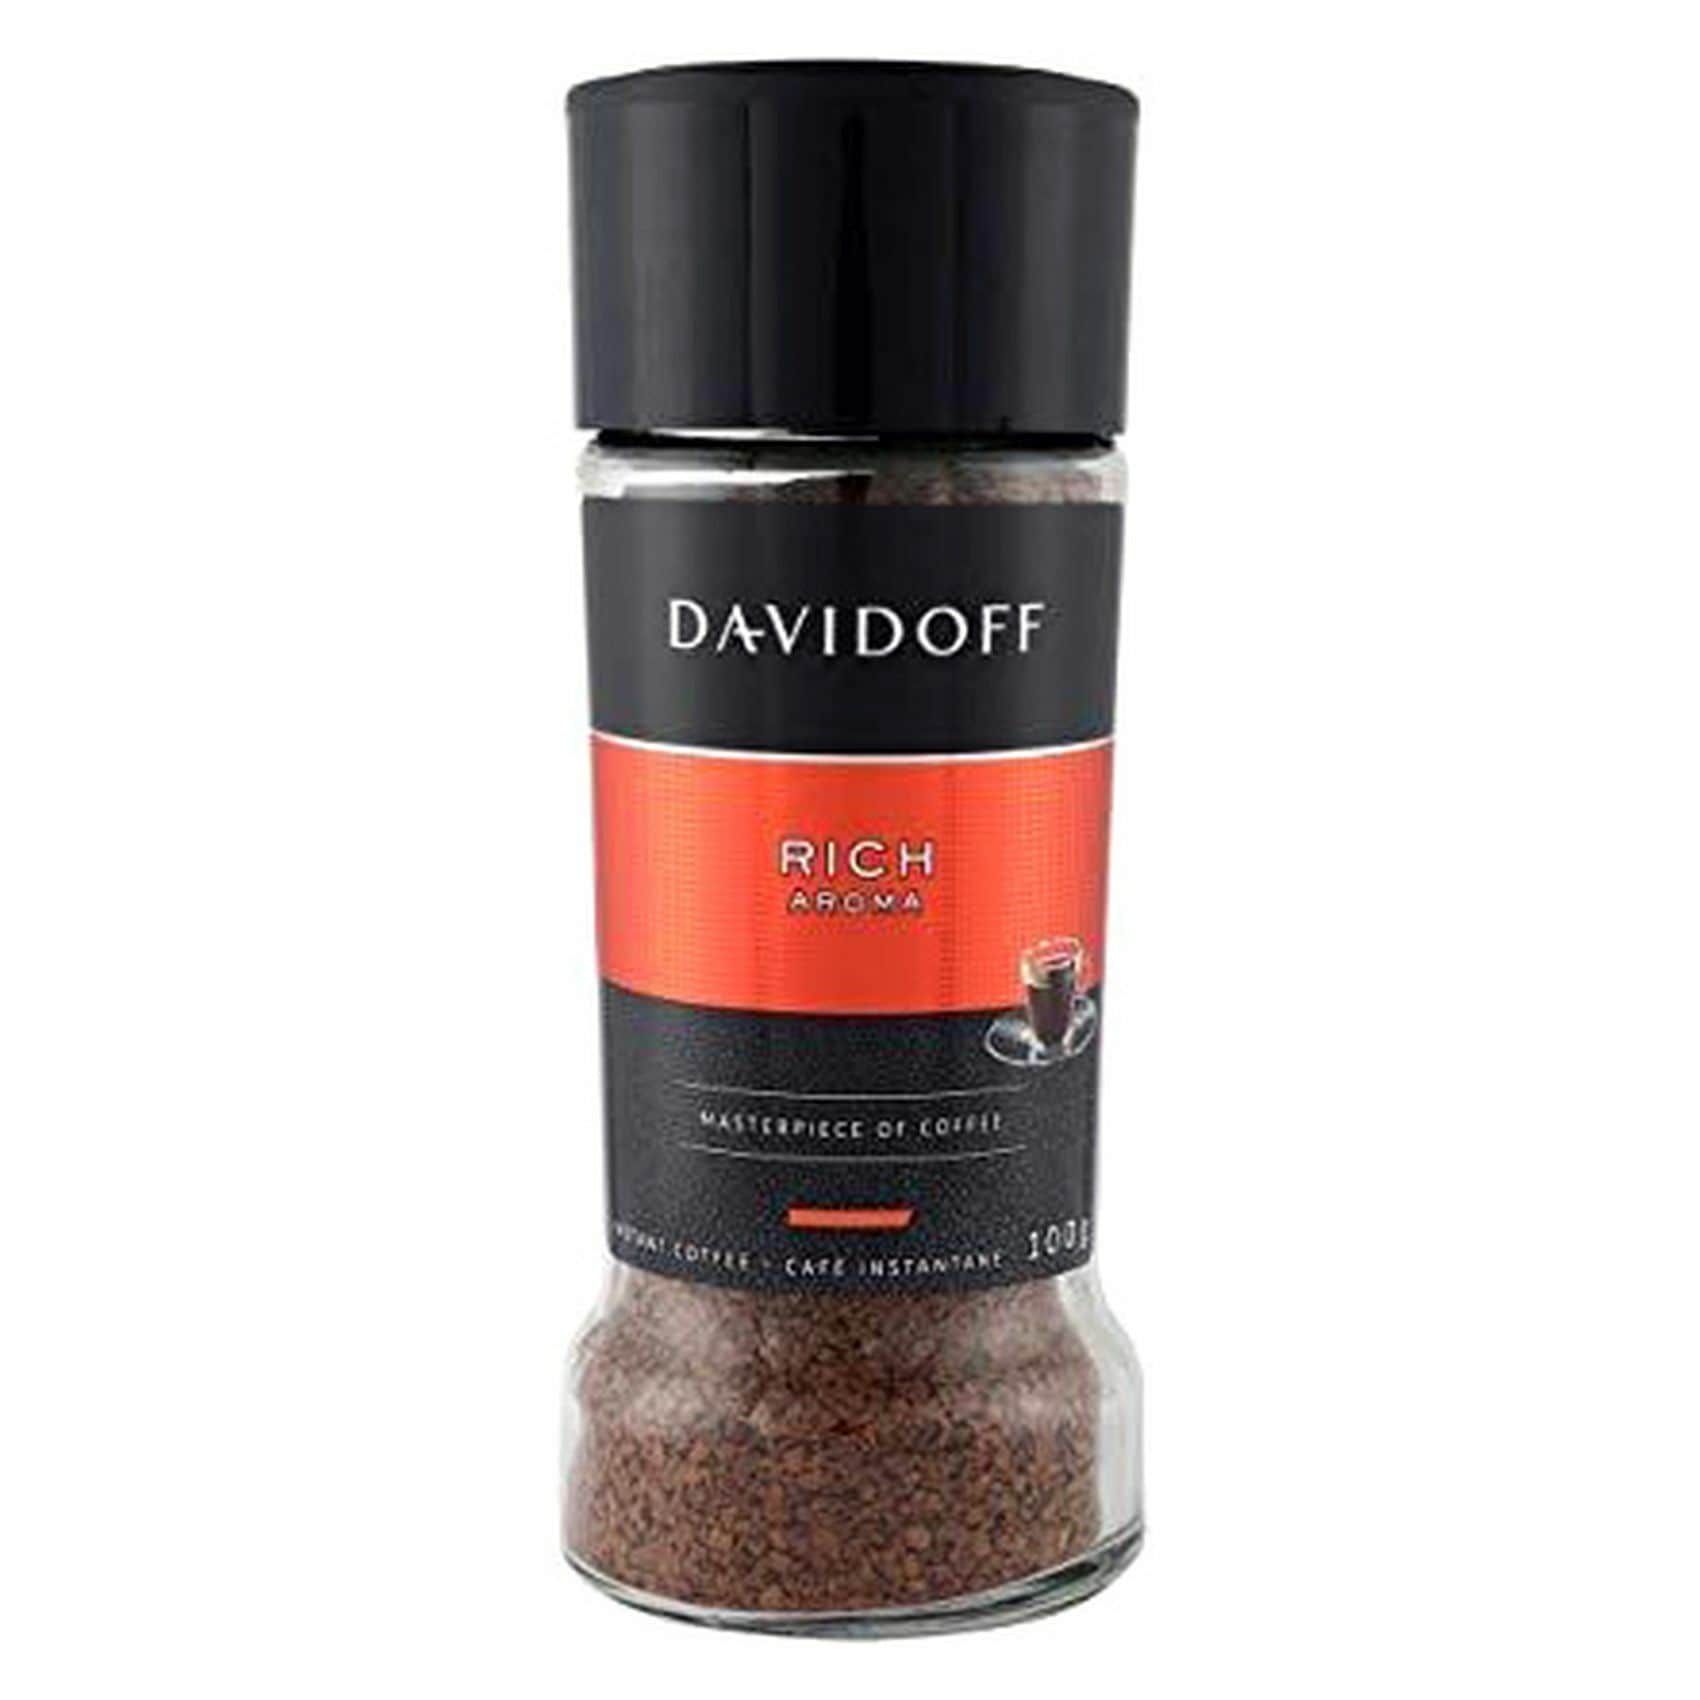 Buy Davidoff Cafe Rich Aroma Instant Coffee 100g Online - Shop ...